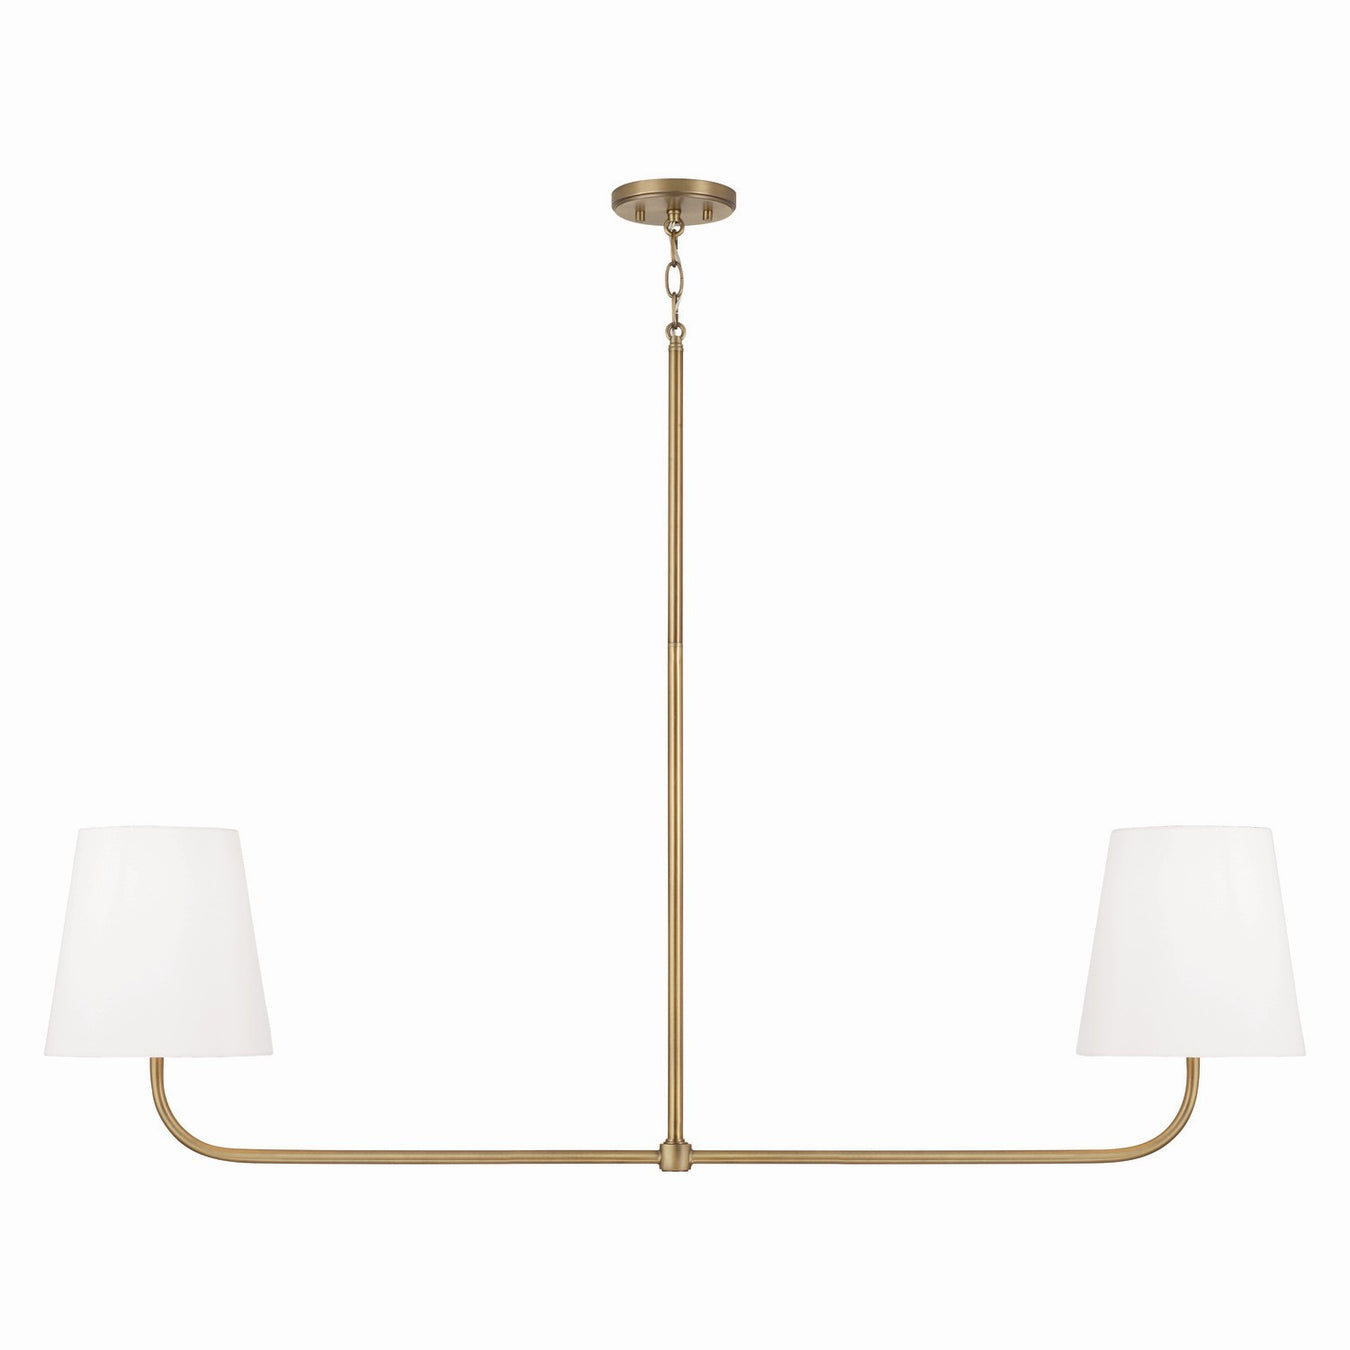 Brody Two Light Island Pendant in Aged Brass